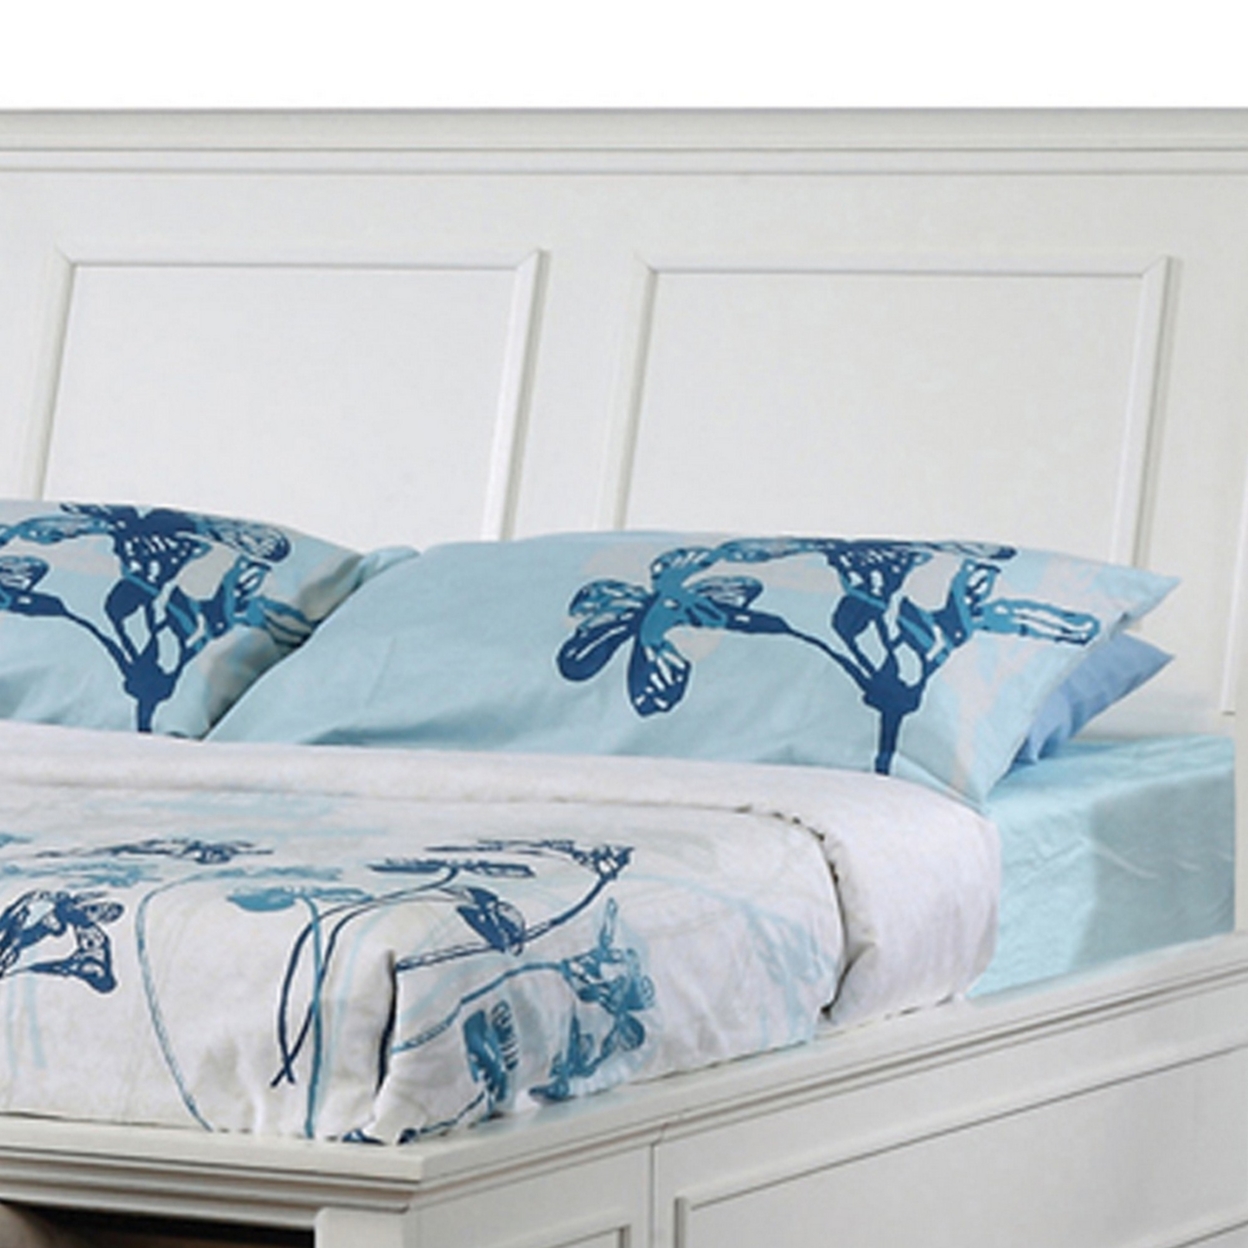 Wooden Twin Bed With Outwardly Curved Headboard And Bottom Drawers, White- Saltoro Sherpi